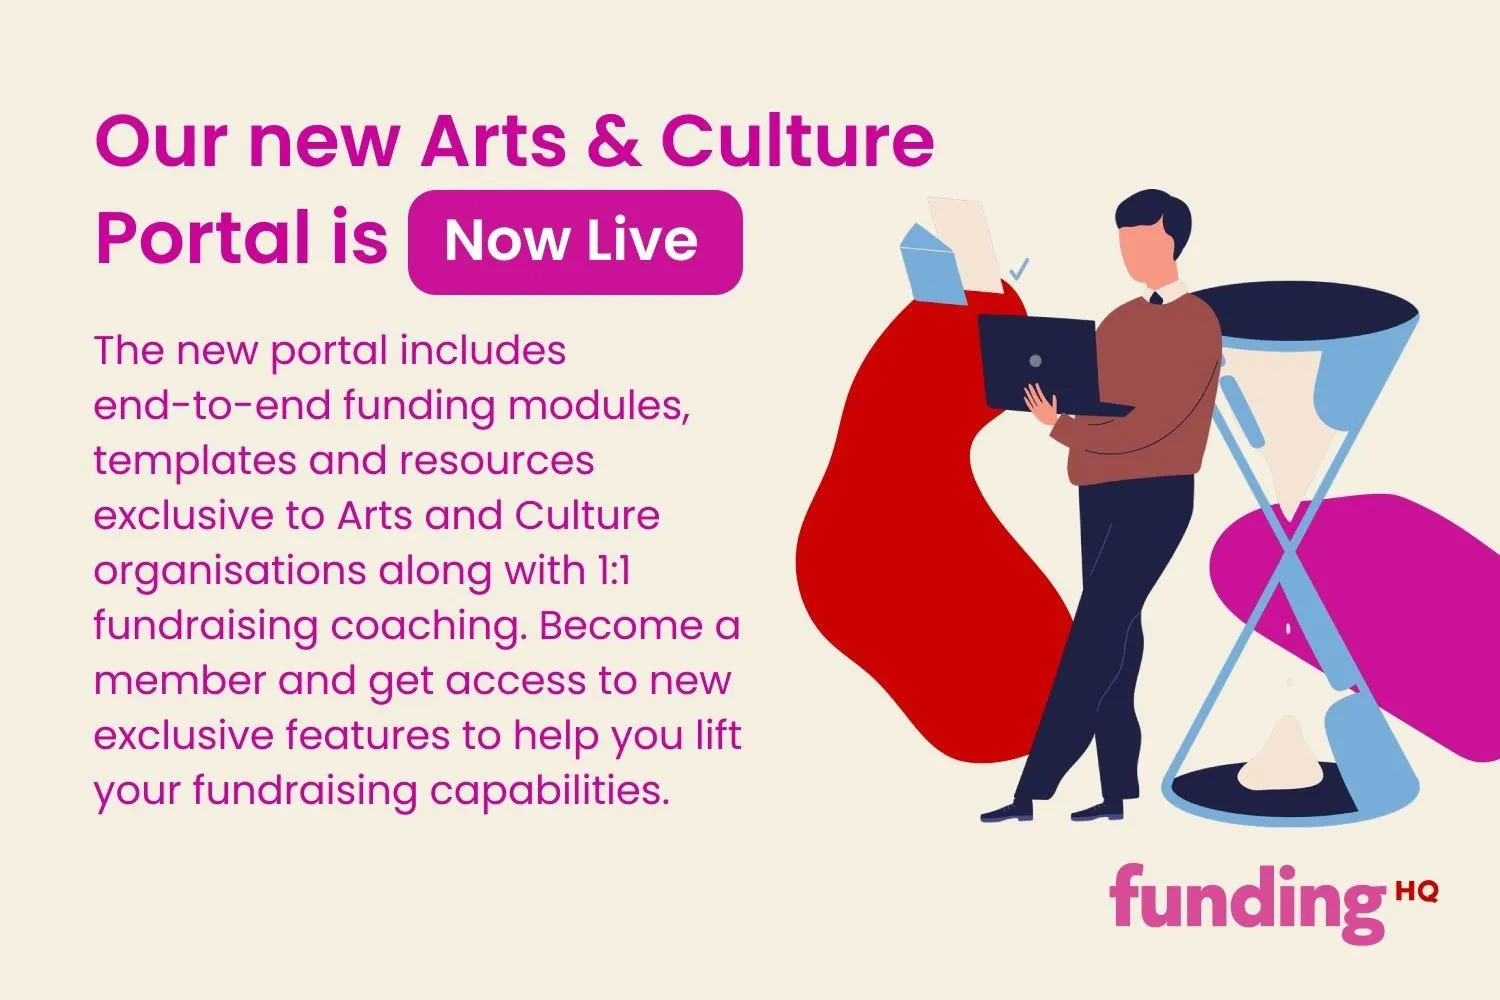 Funding HQ - NZ’s first fundraising capability platform dedicated to arts and culture